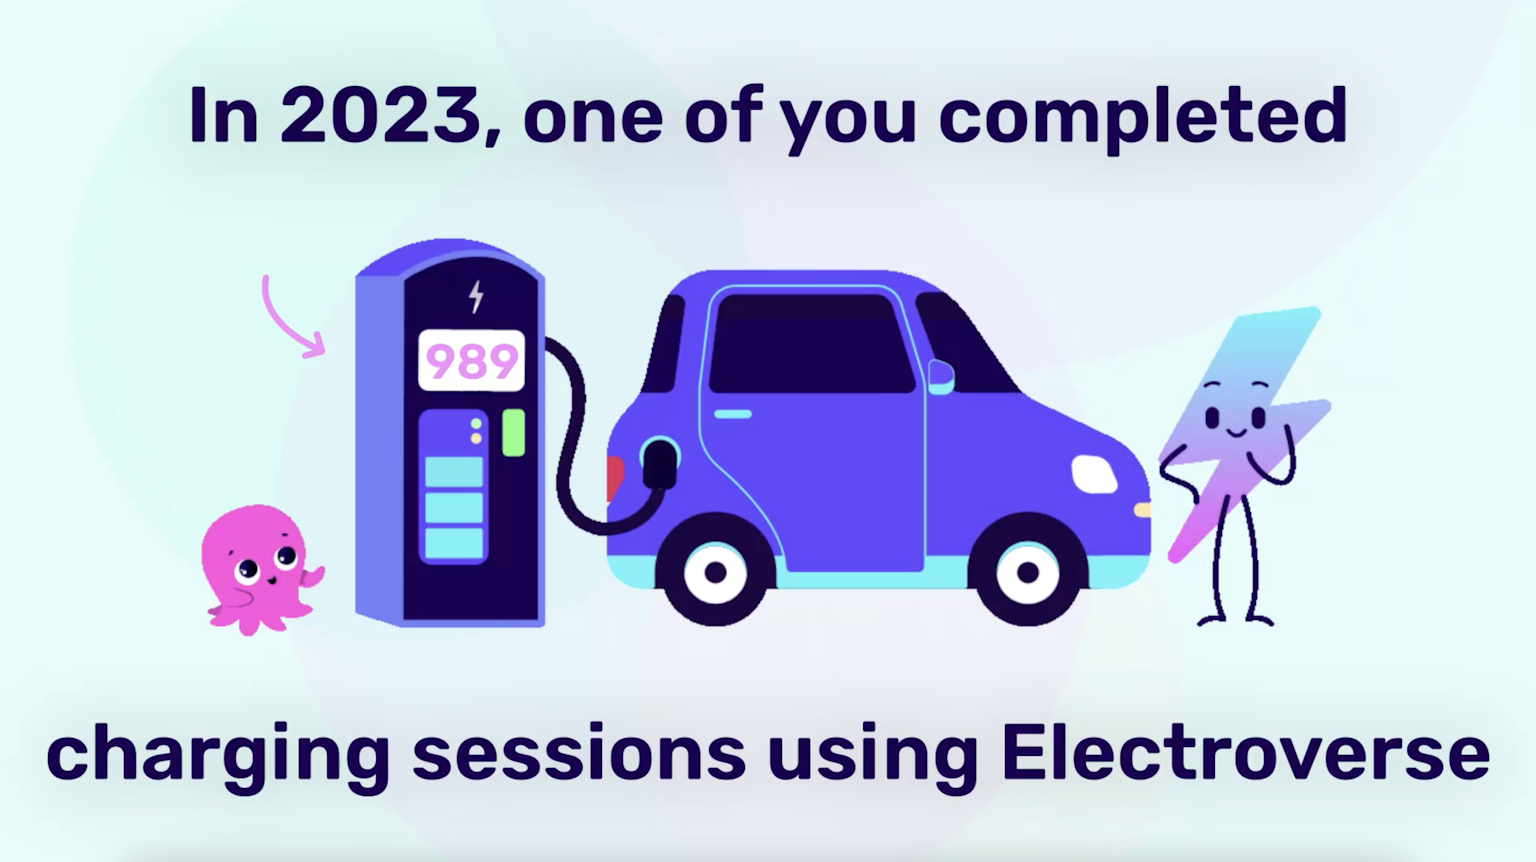 989 charging sessions - electroverse wrapped 2023